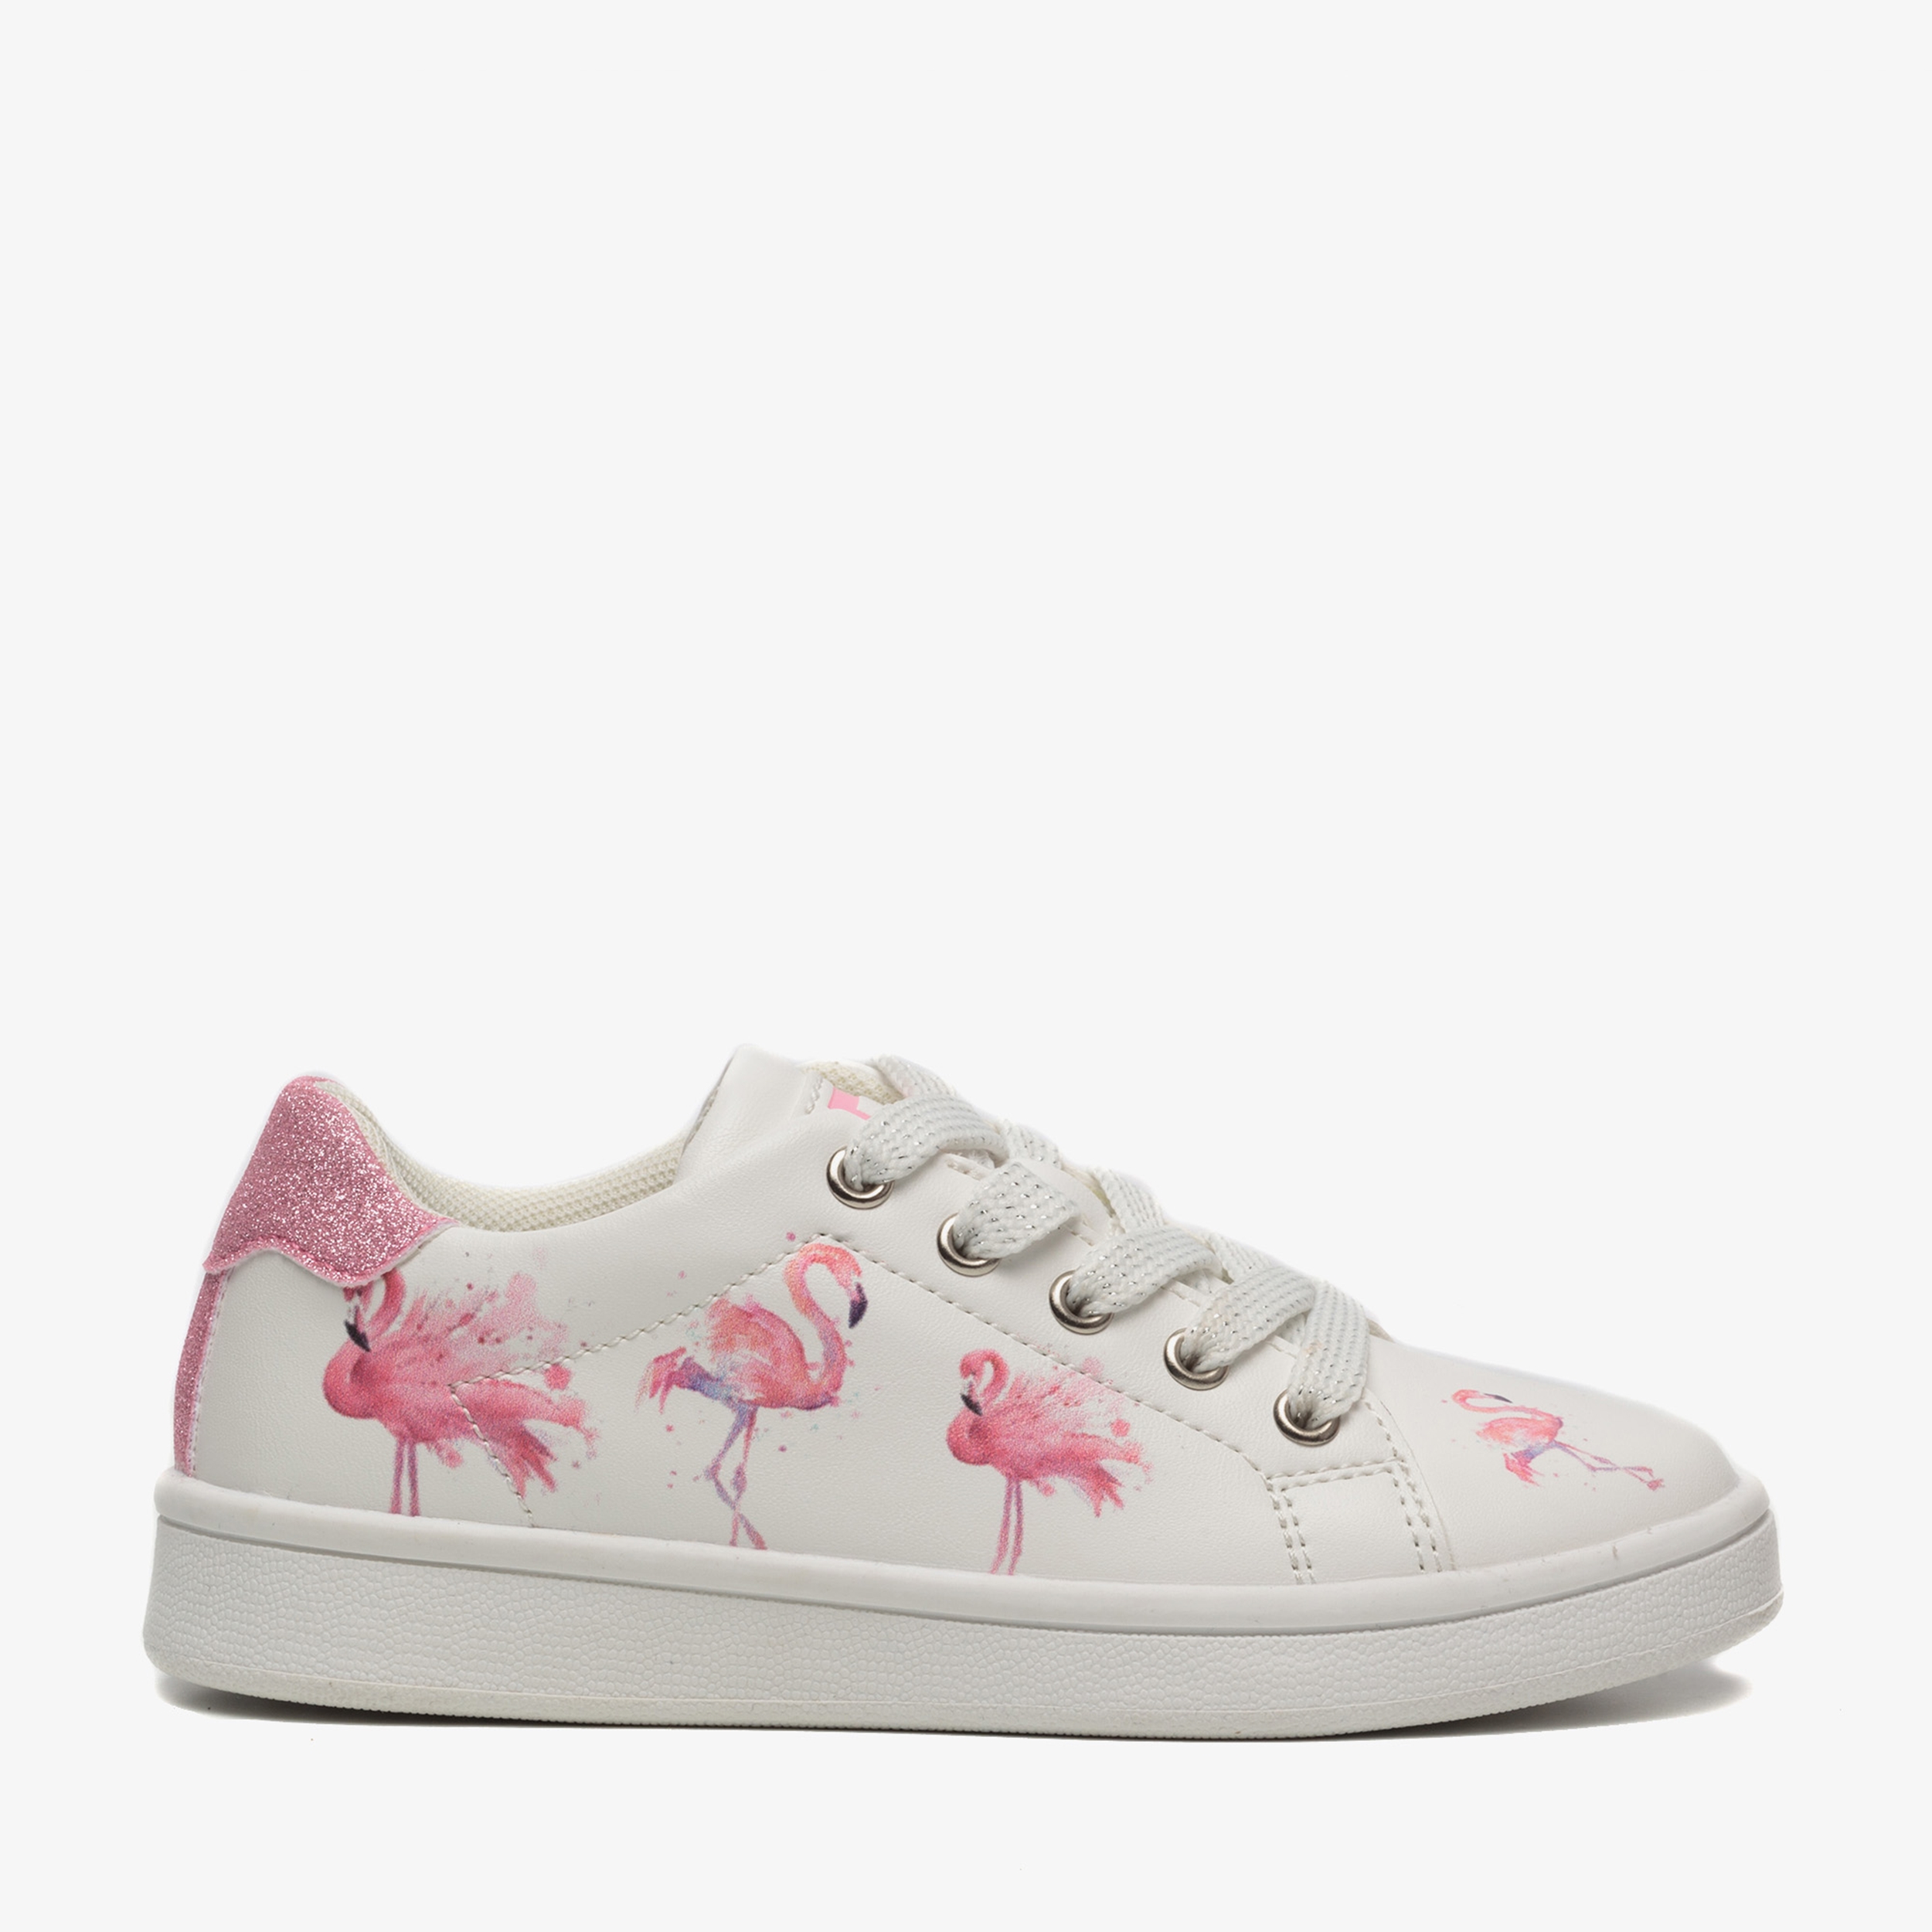 pink and blue flamingo sneakers